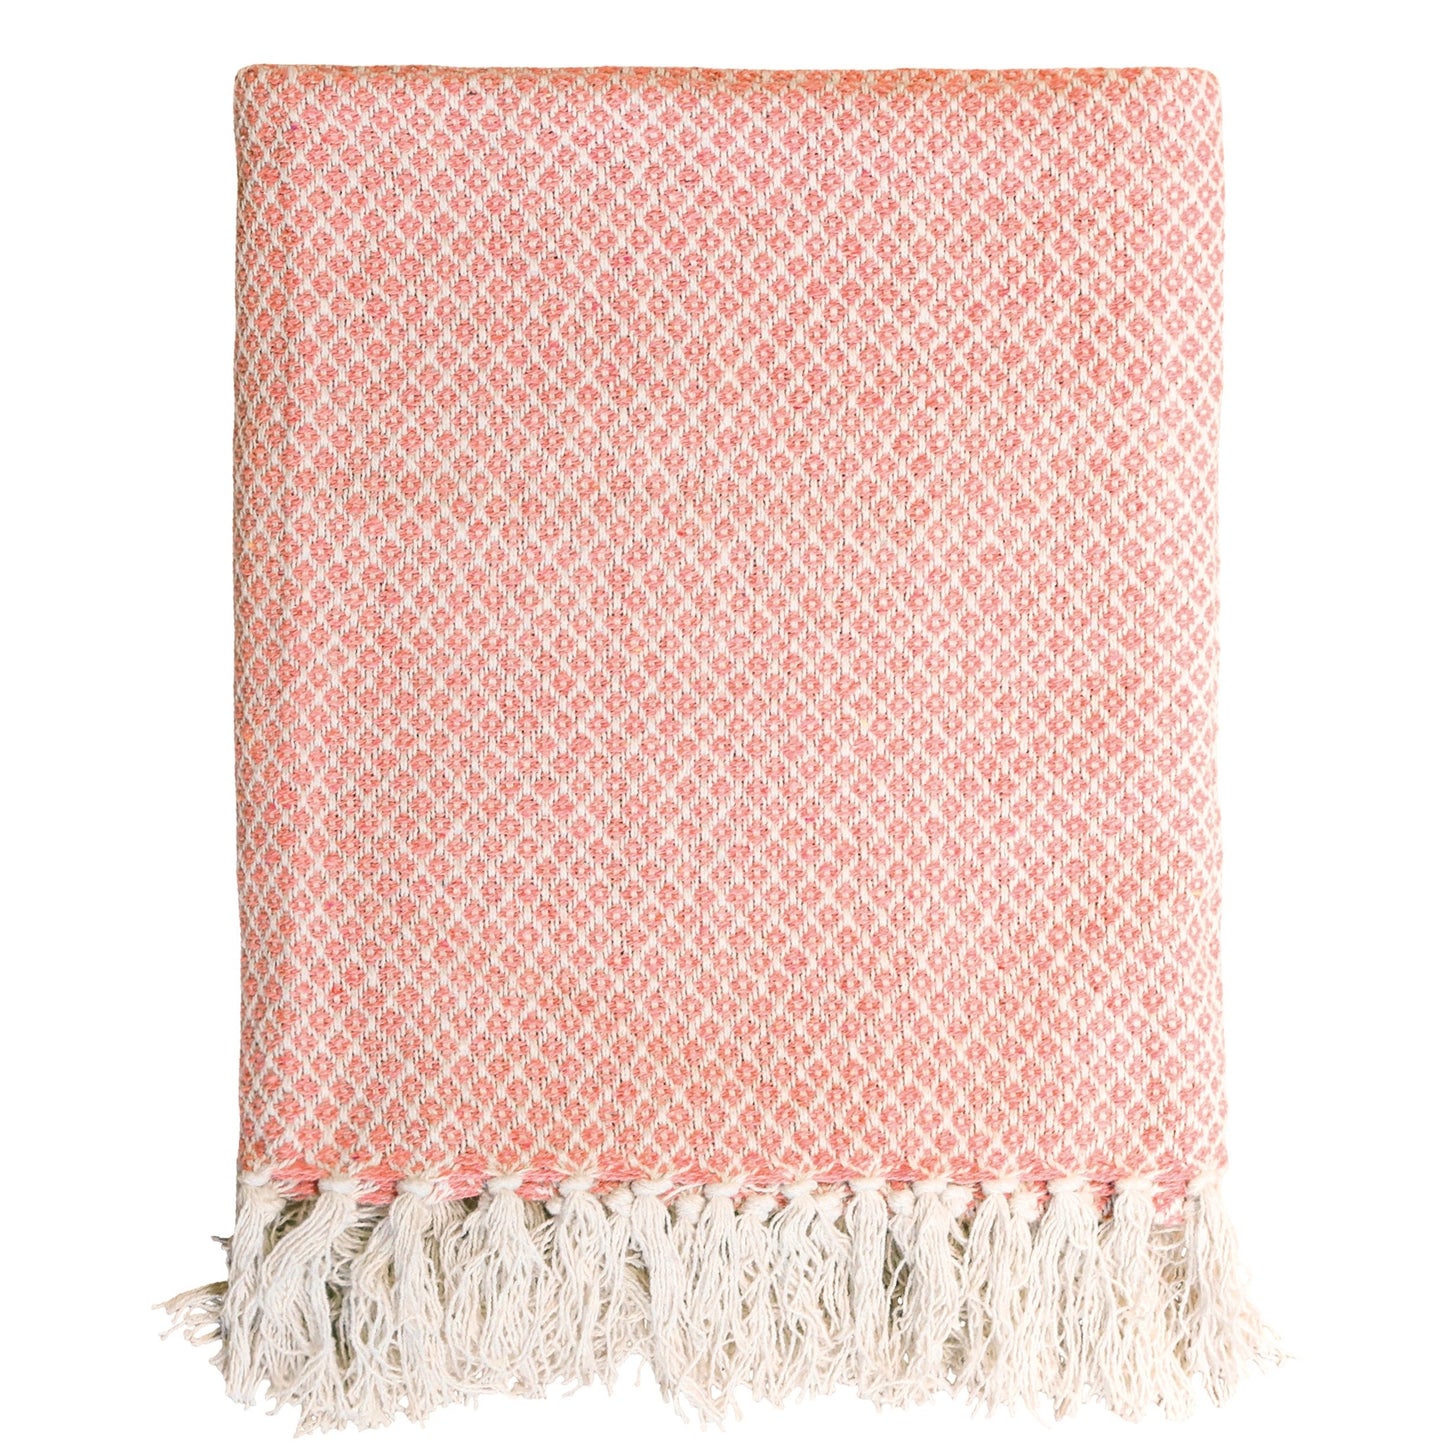 Dusty Rose Patterned Throw